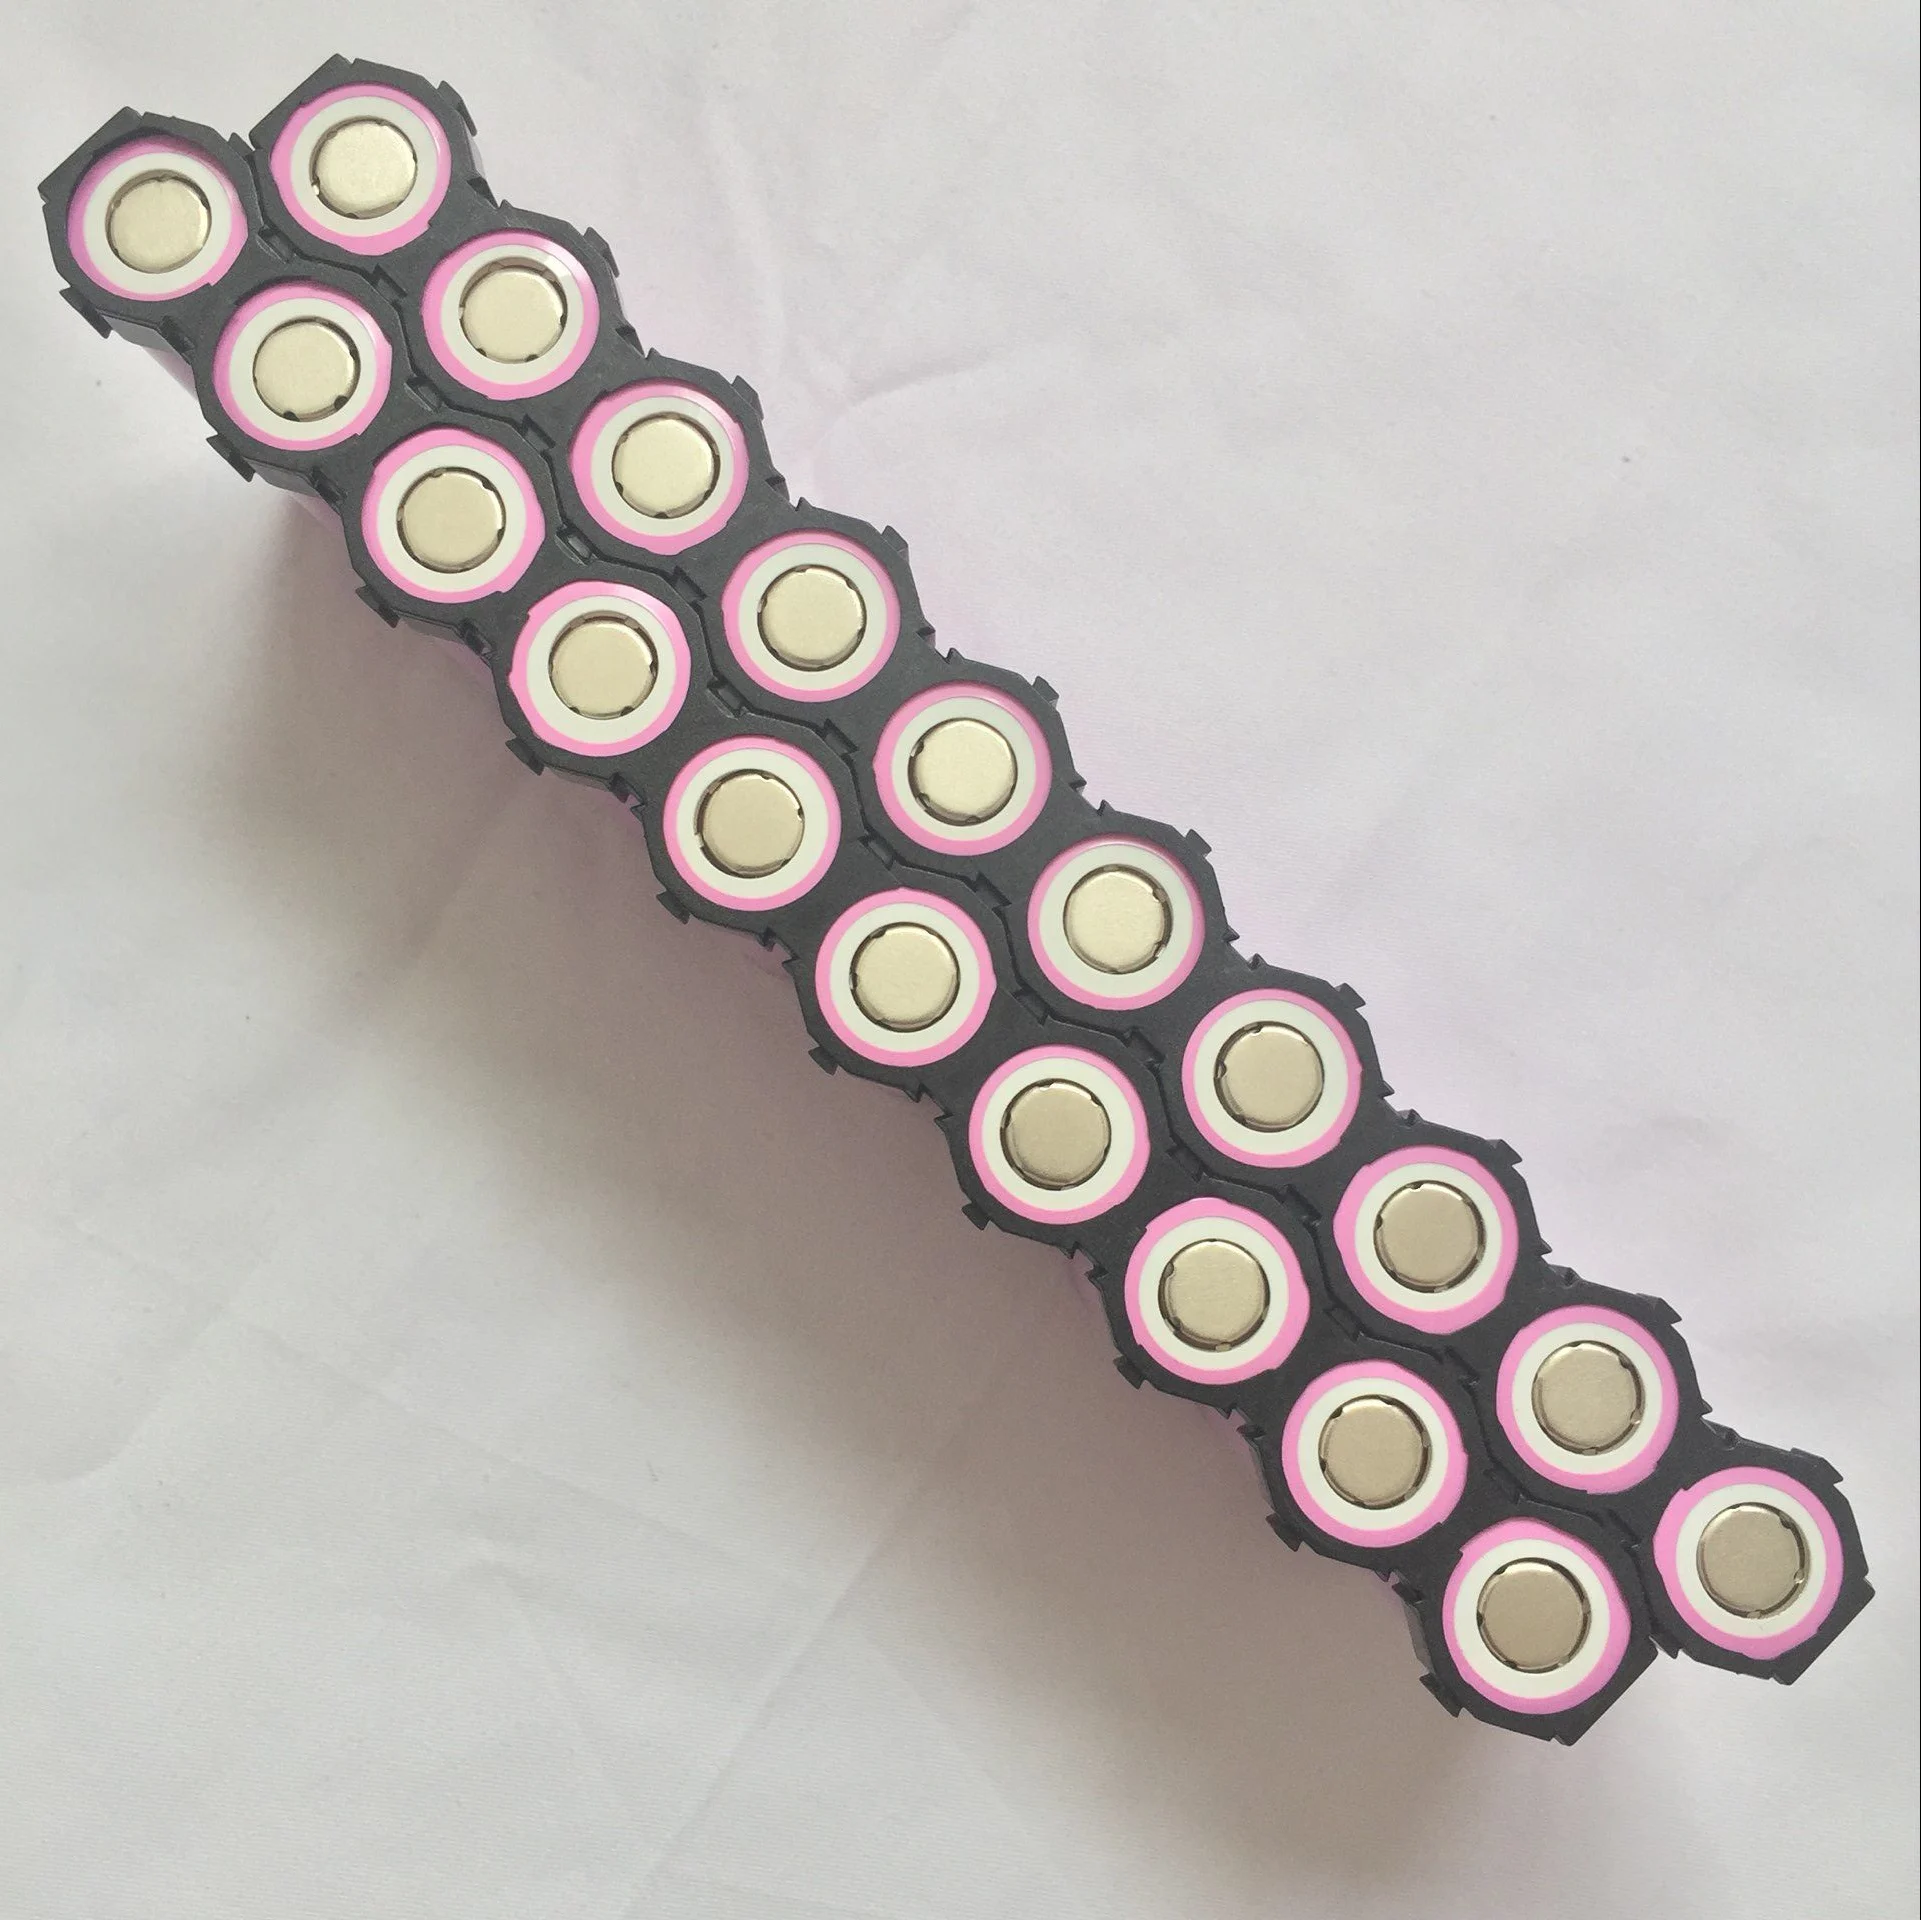 100pcs /lot 10 Series Cylindrical 18650 lithium ion battery holder for Electric Bicycle